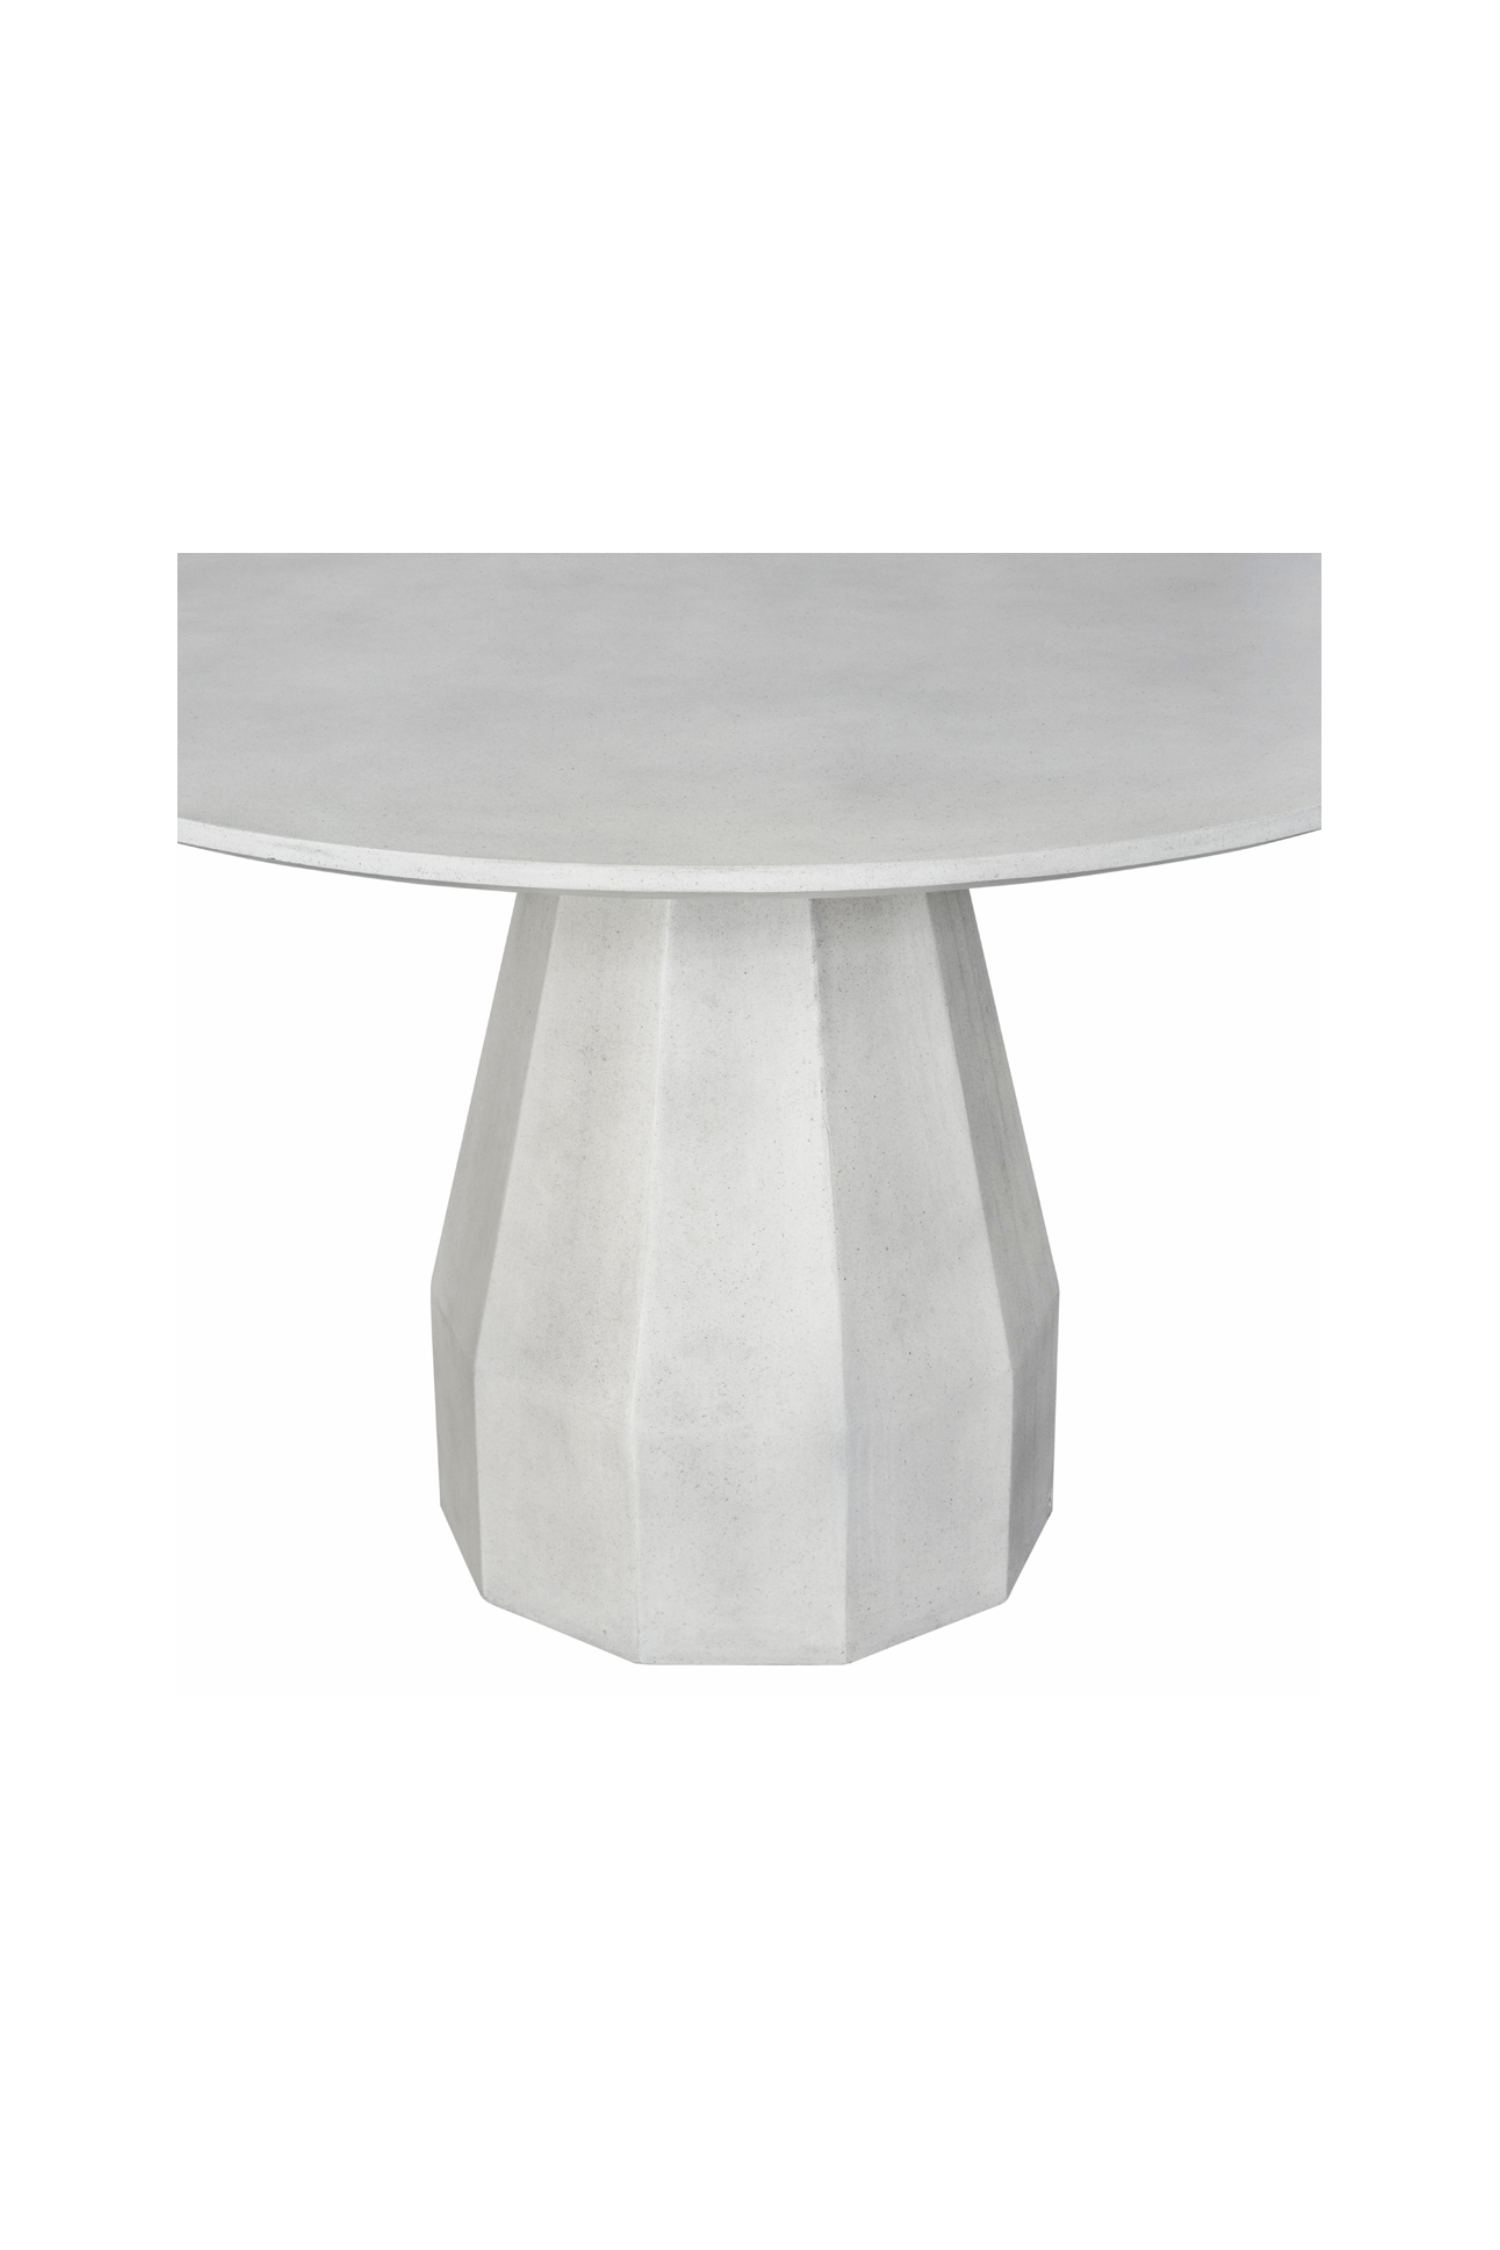 Cassien Outdoor Dining Table - White